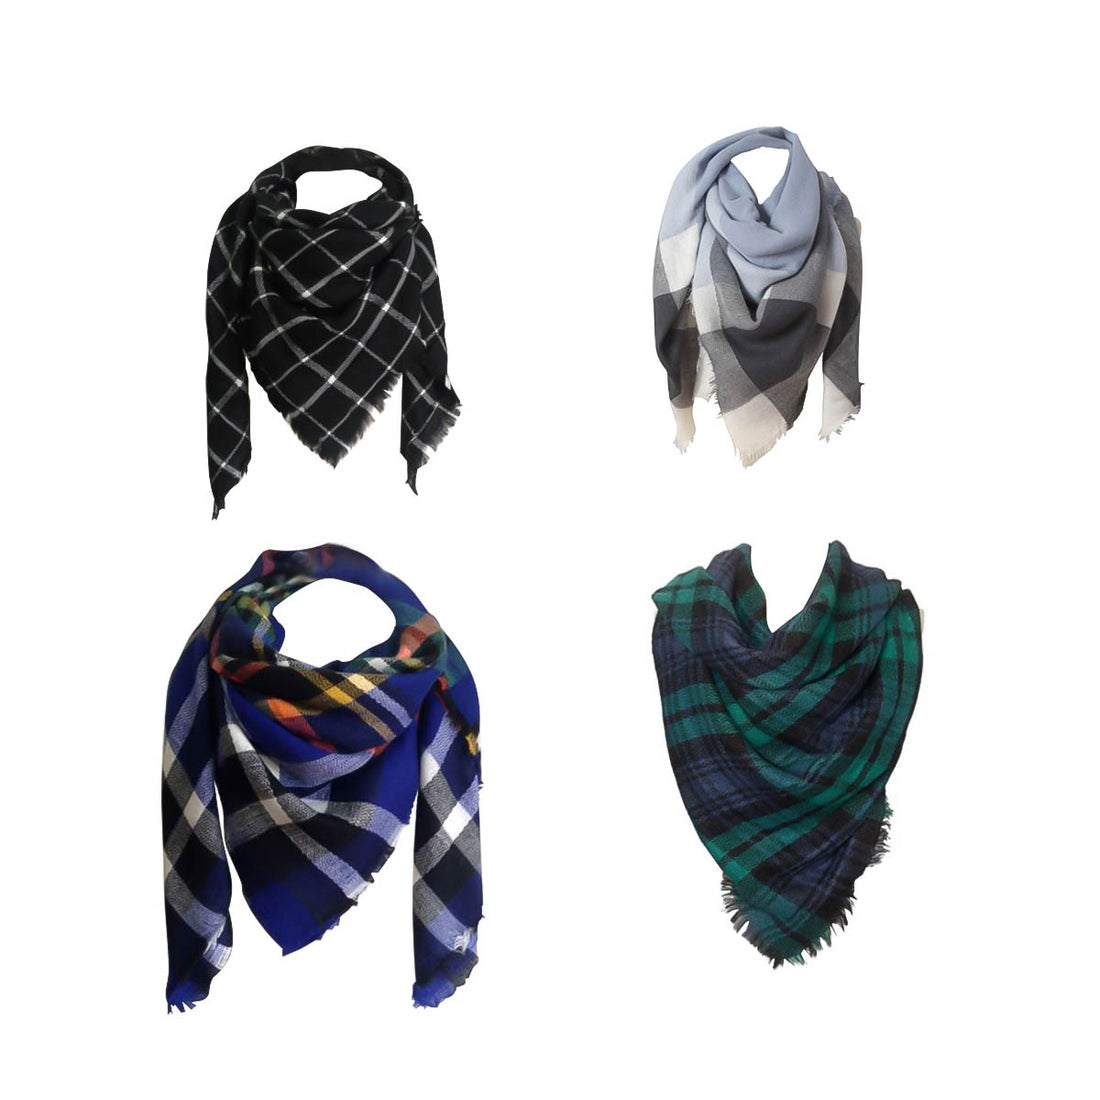 Oversized Wrap Scarf - Black, Green, Grey or Multi Color